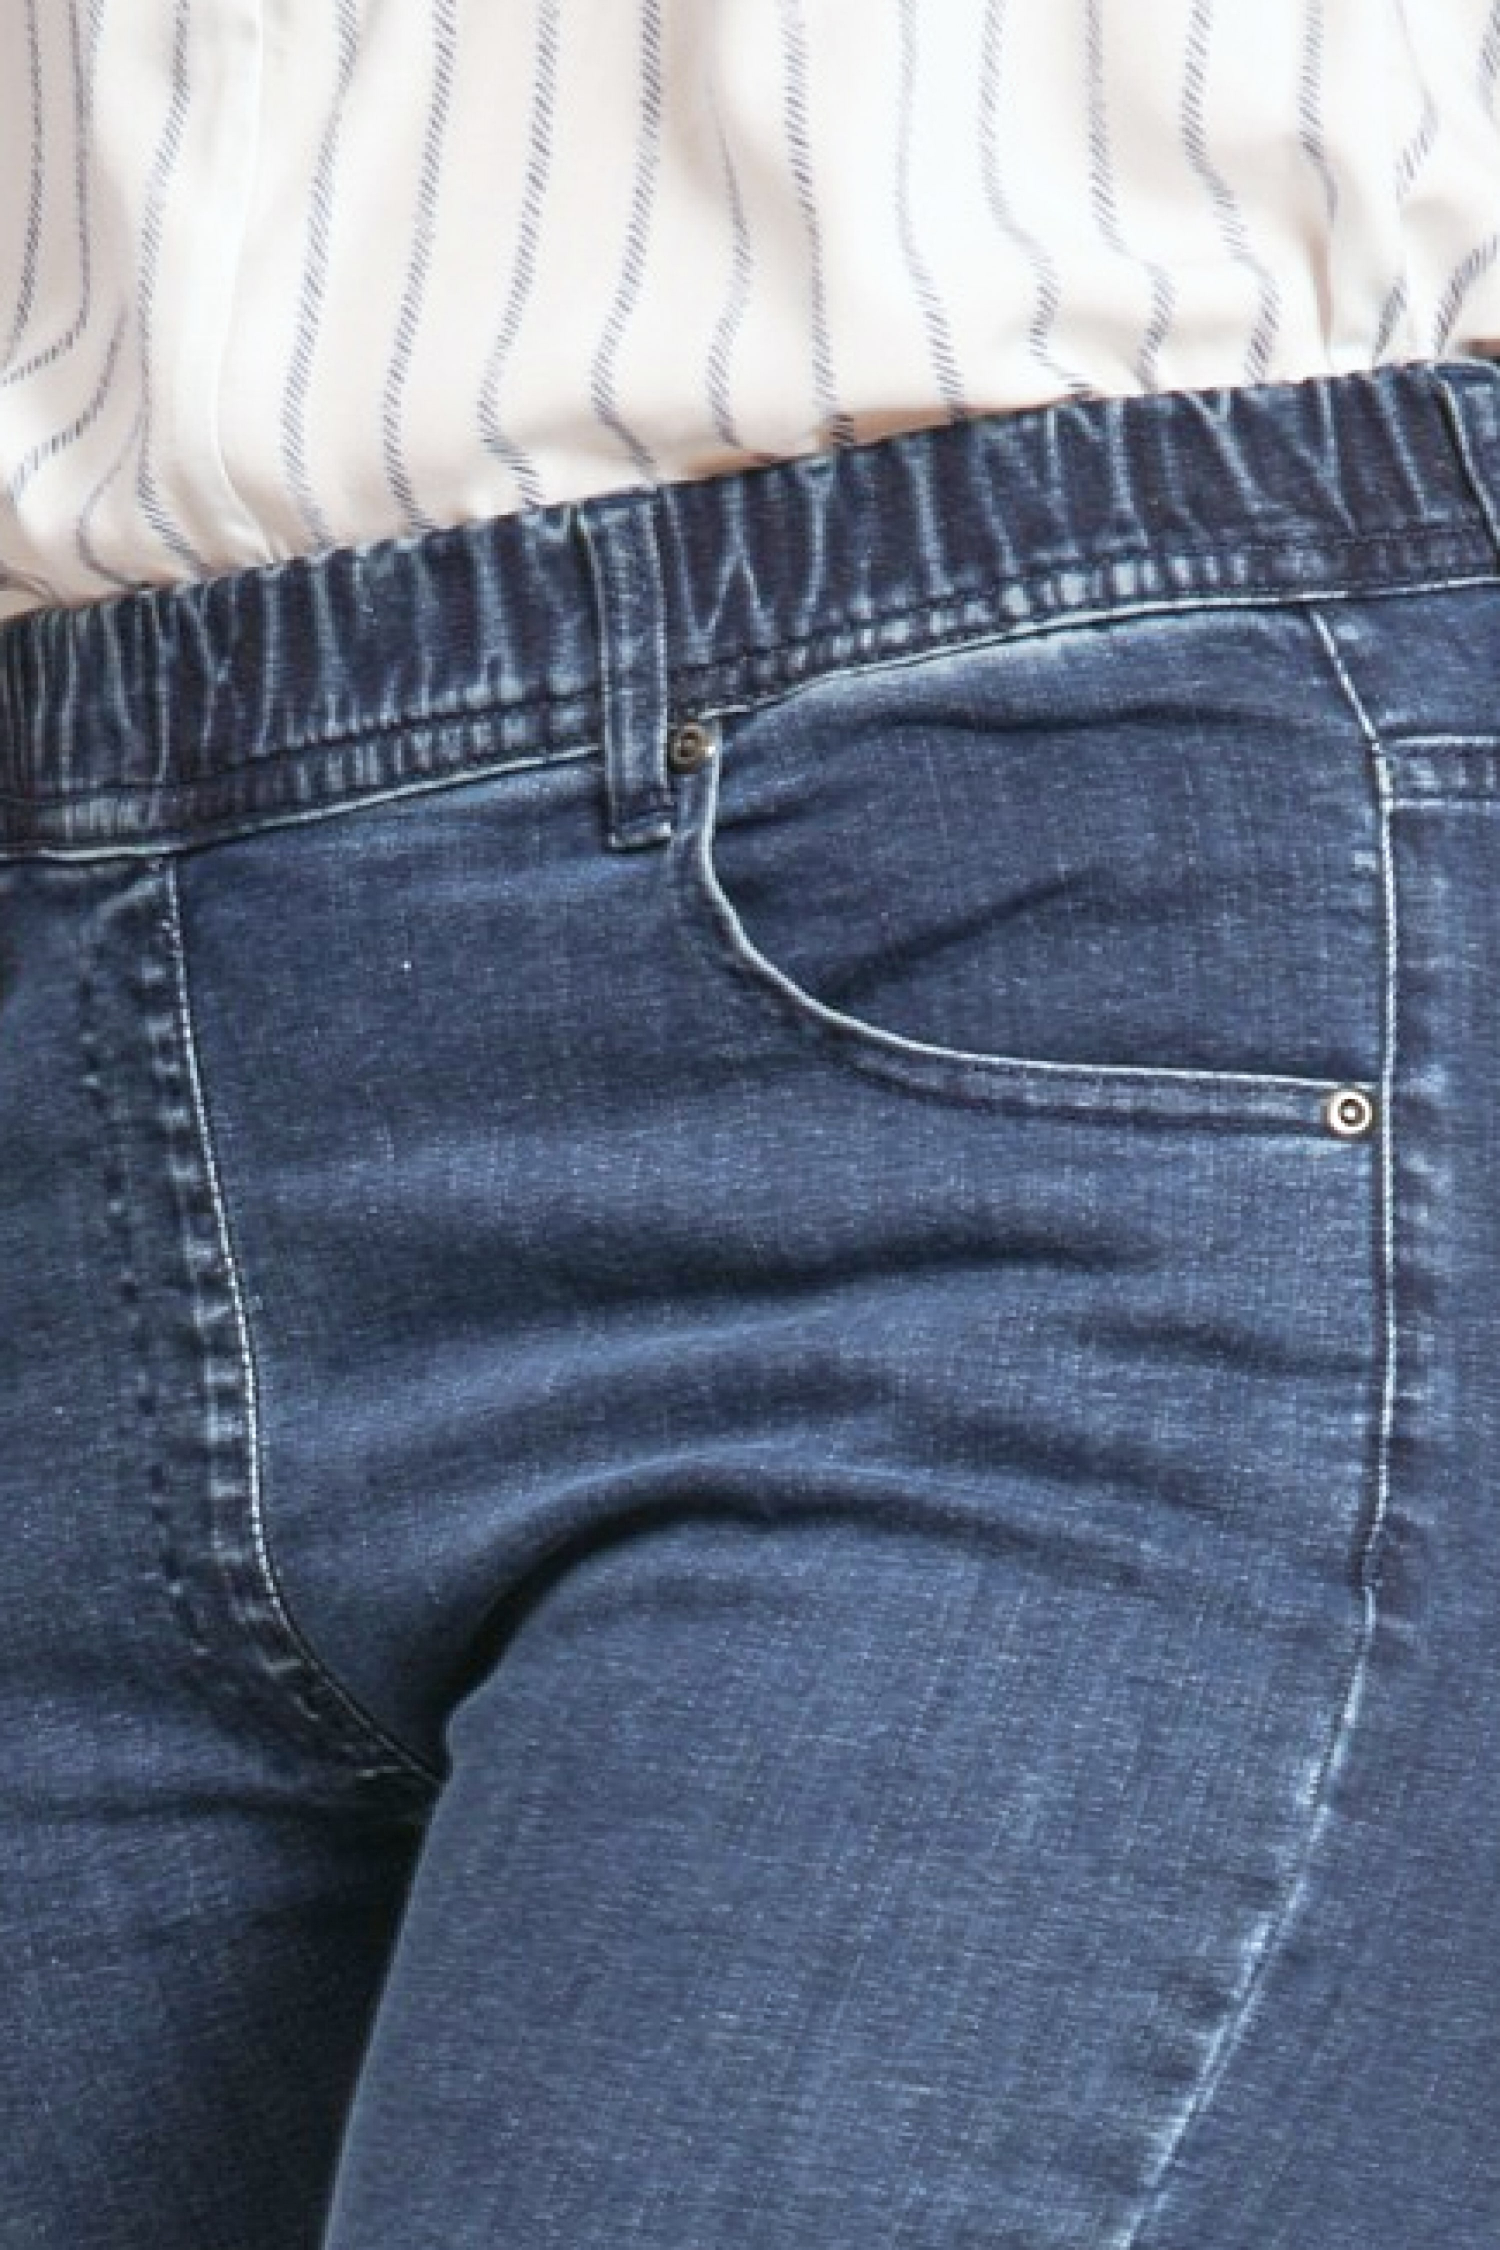 7/8 jeans with zip at the bottom